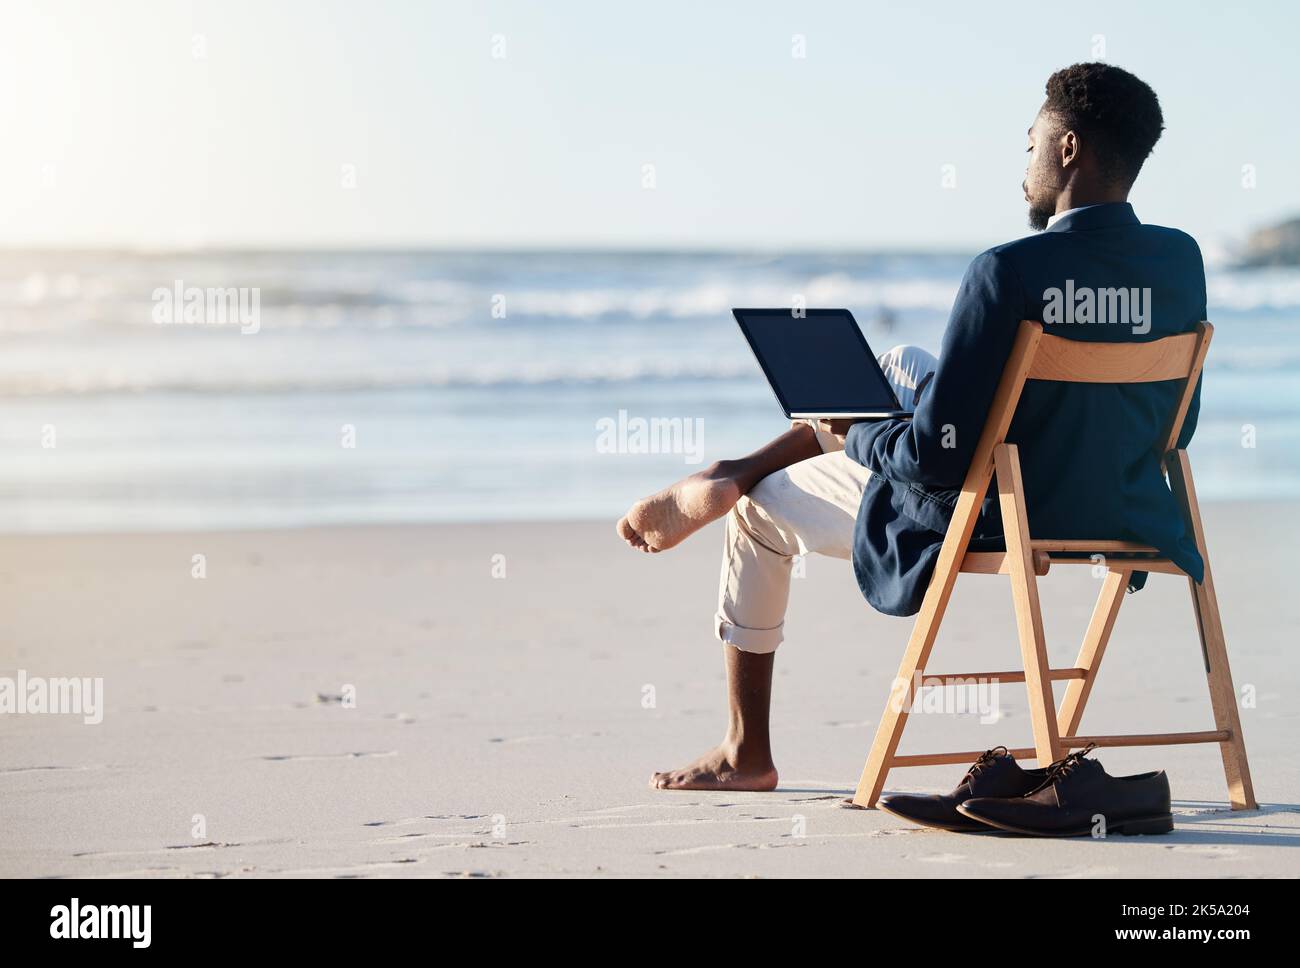 Beach vacation, work travel and black man doing business on holiday reading an email with 5g internet while working by ocean. Relax, break and happy Stock Photo